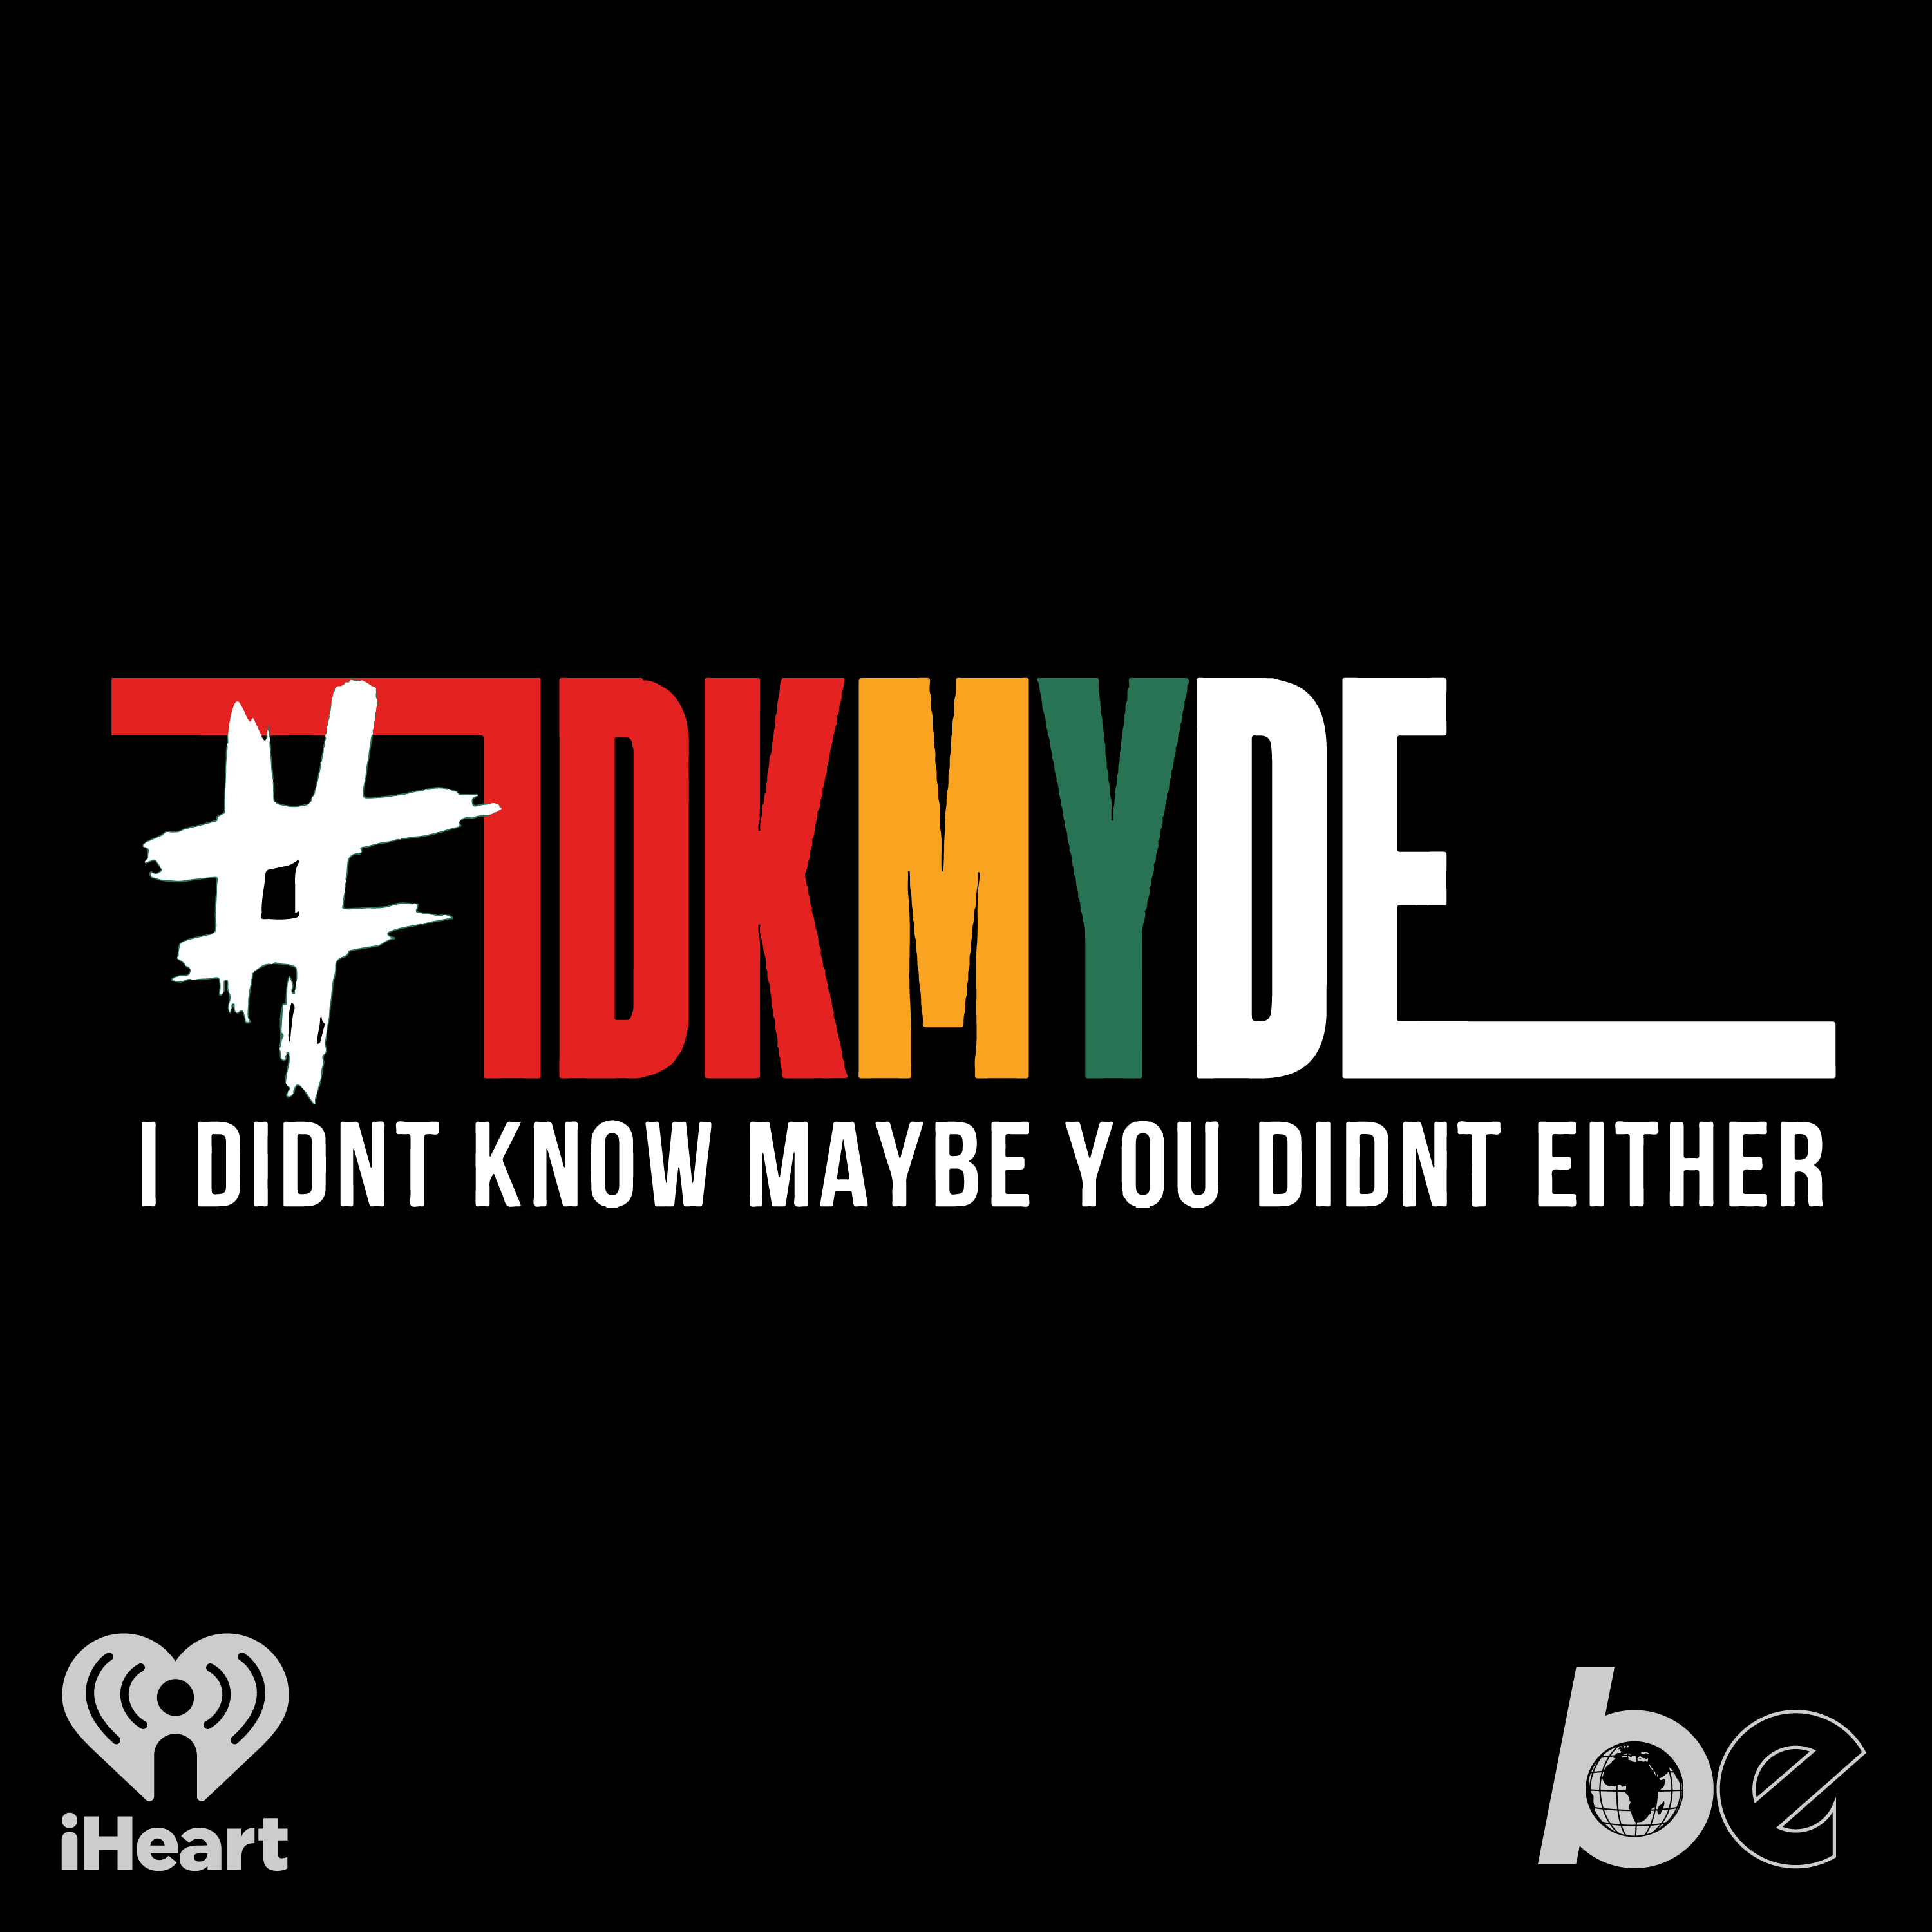 IDKMYDE: BURNED An Orphanage In NYC